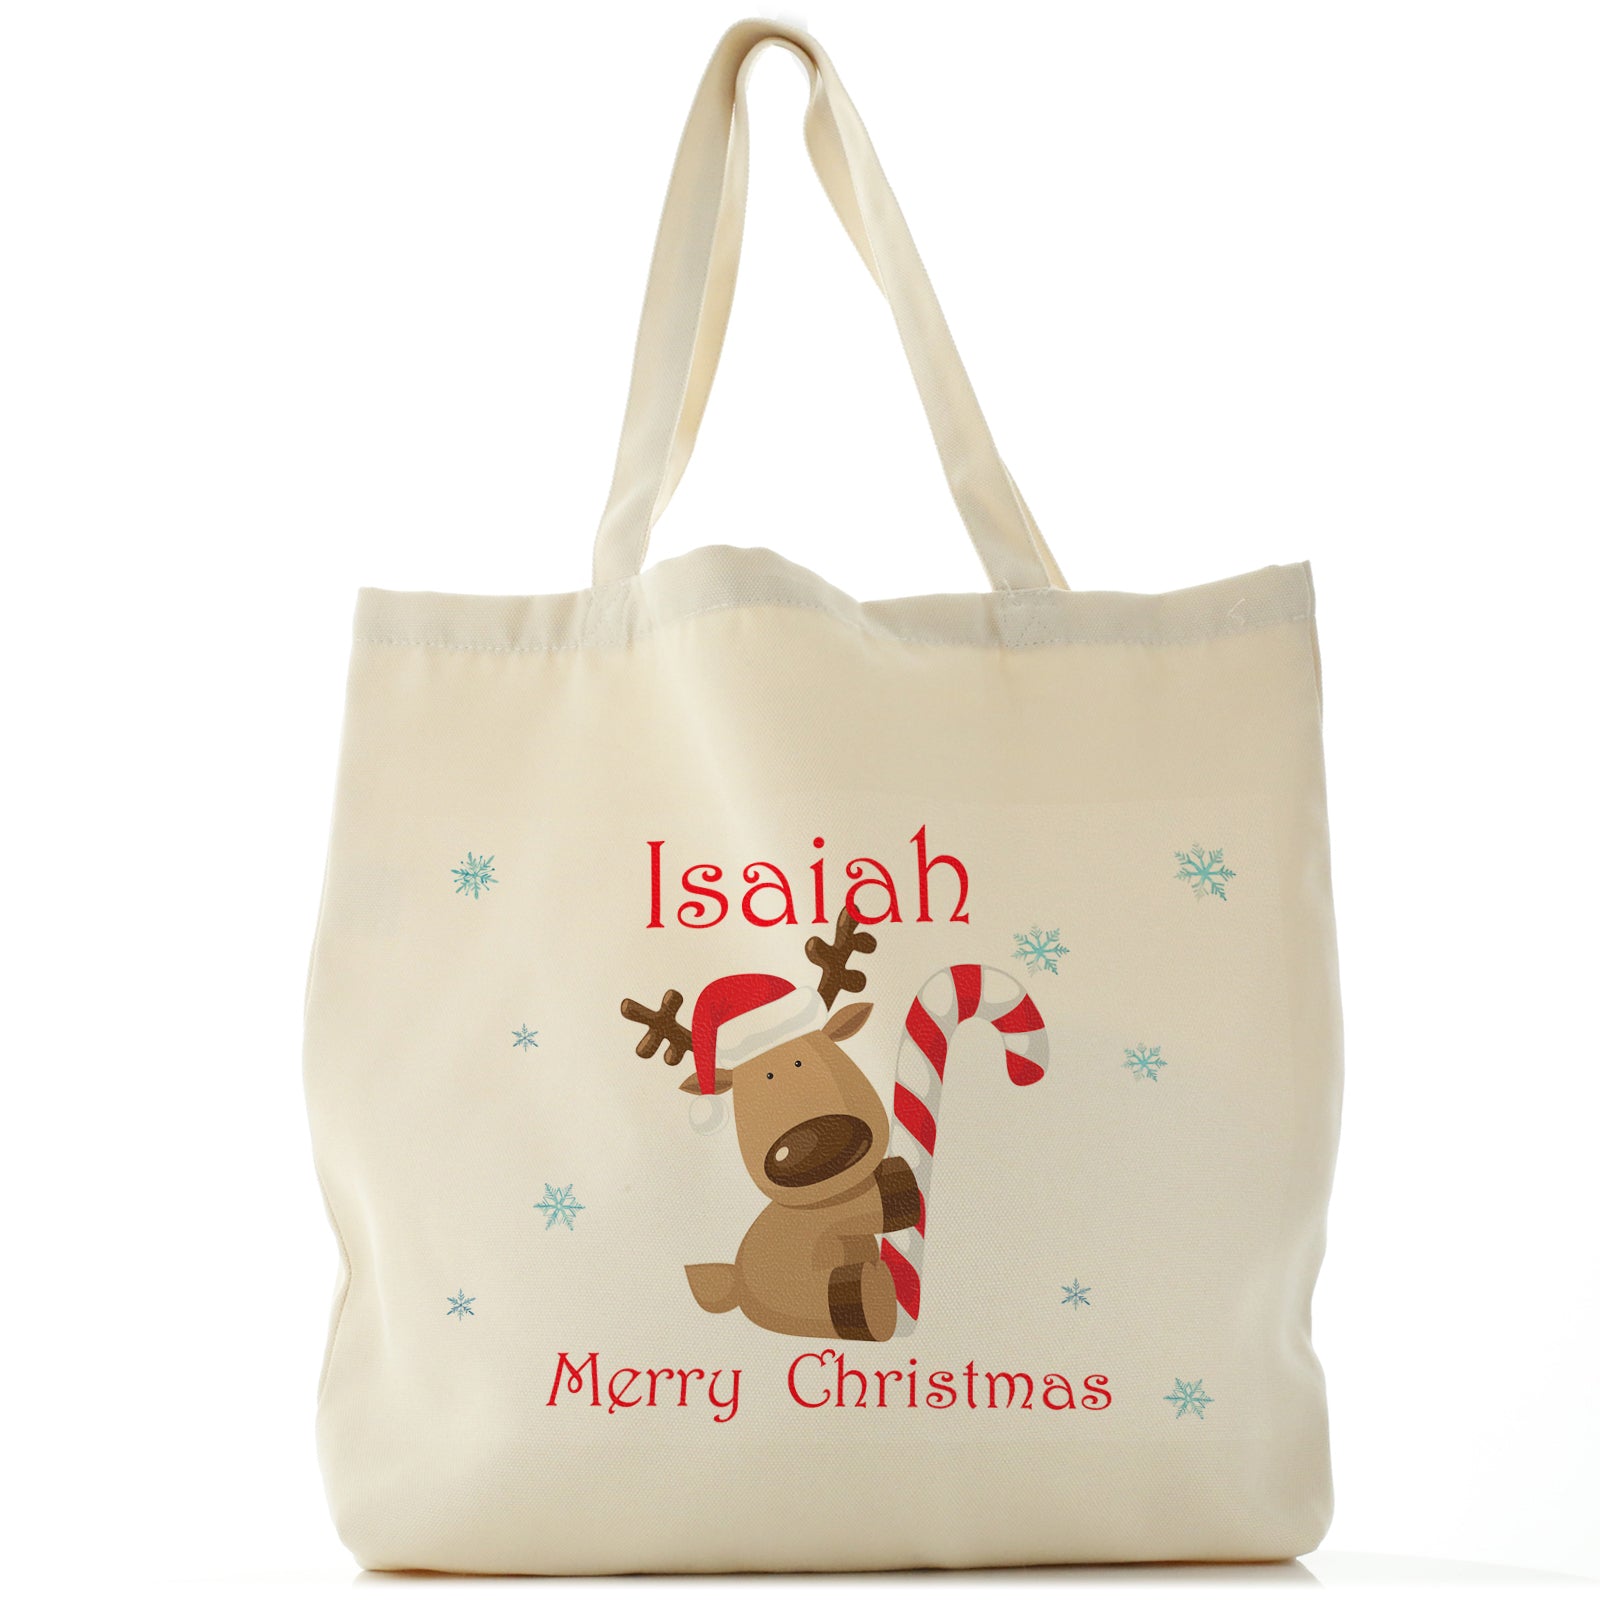 Personalised Canvas Tote Bag with Festive Text and Candy Cane Reindeer